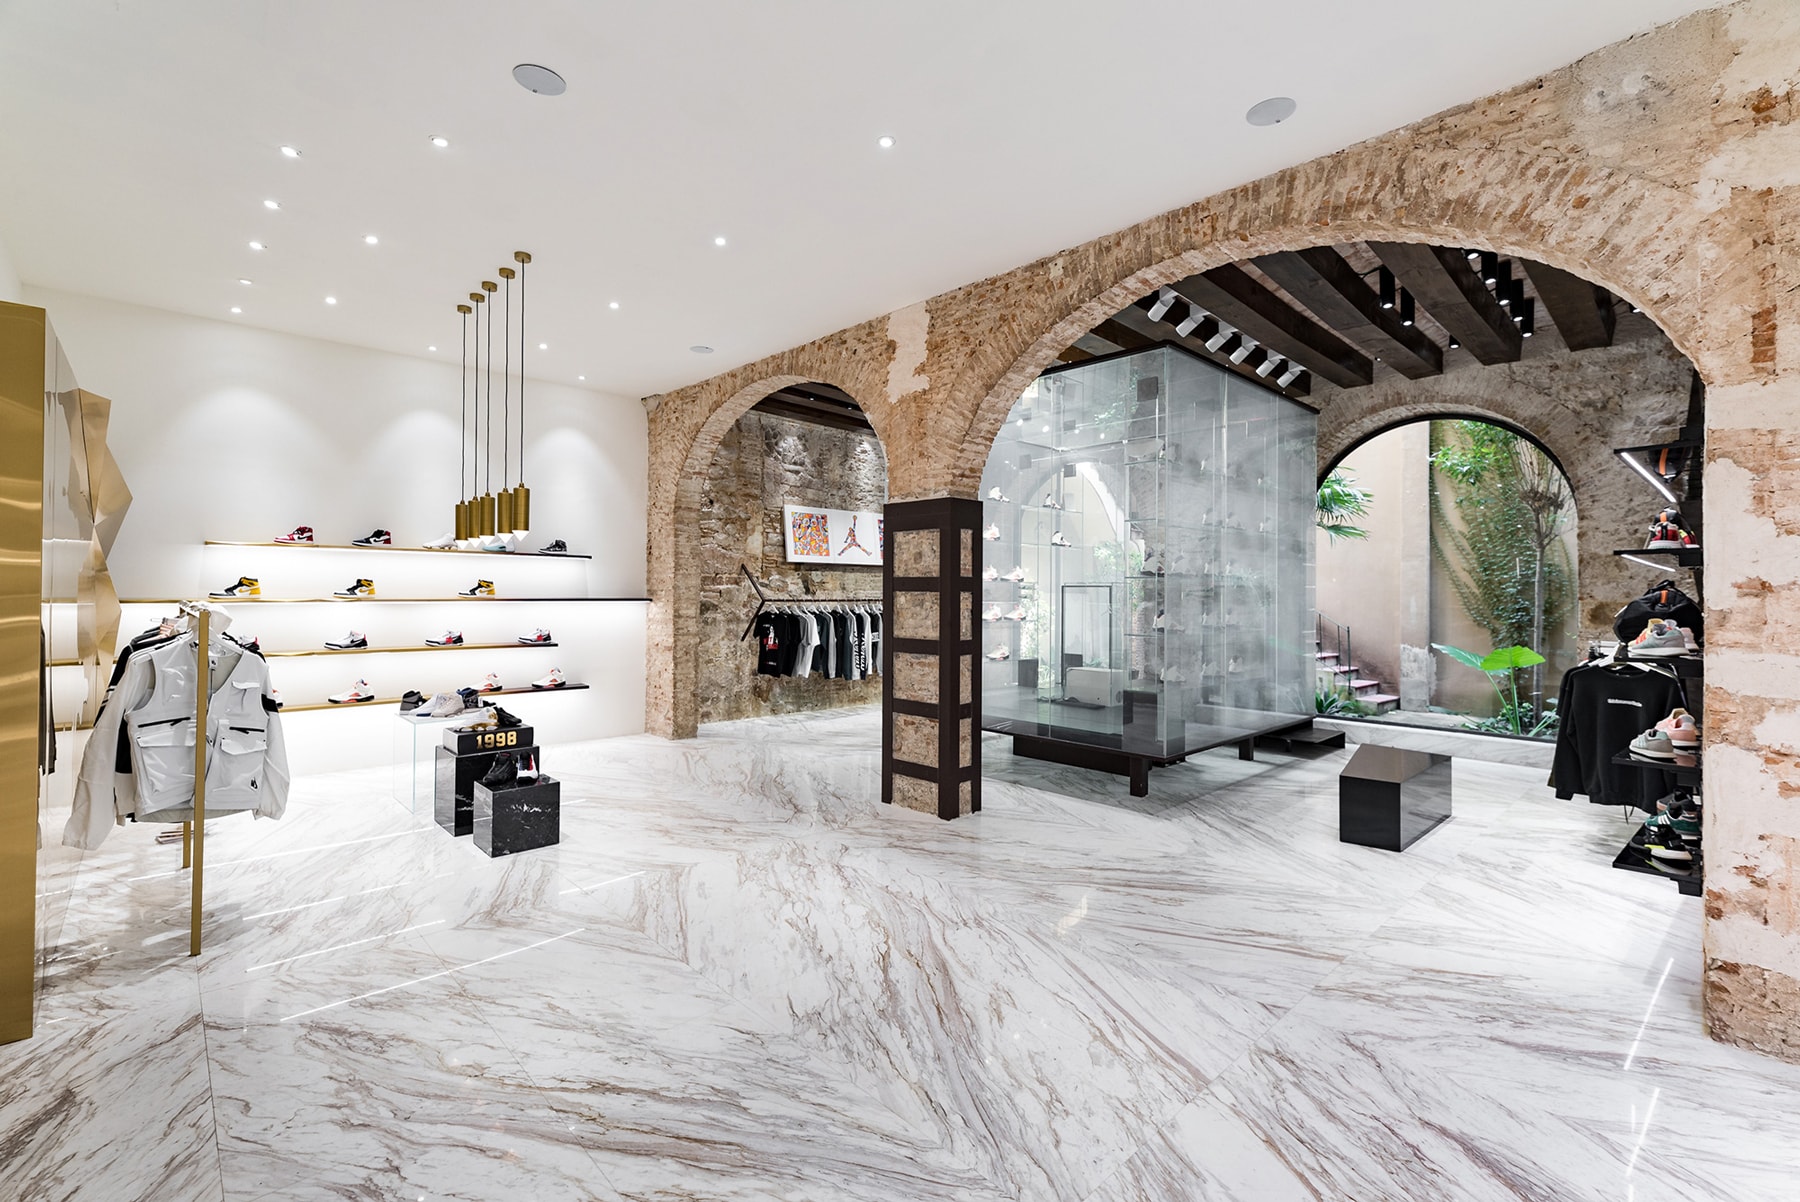 Foot District New Boutique Barcelona opening spain move shop outpost location design interior luxury